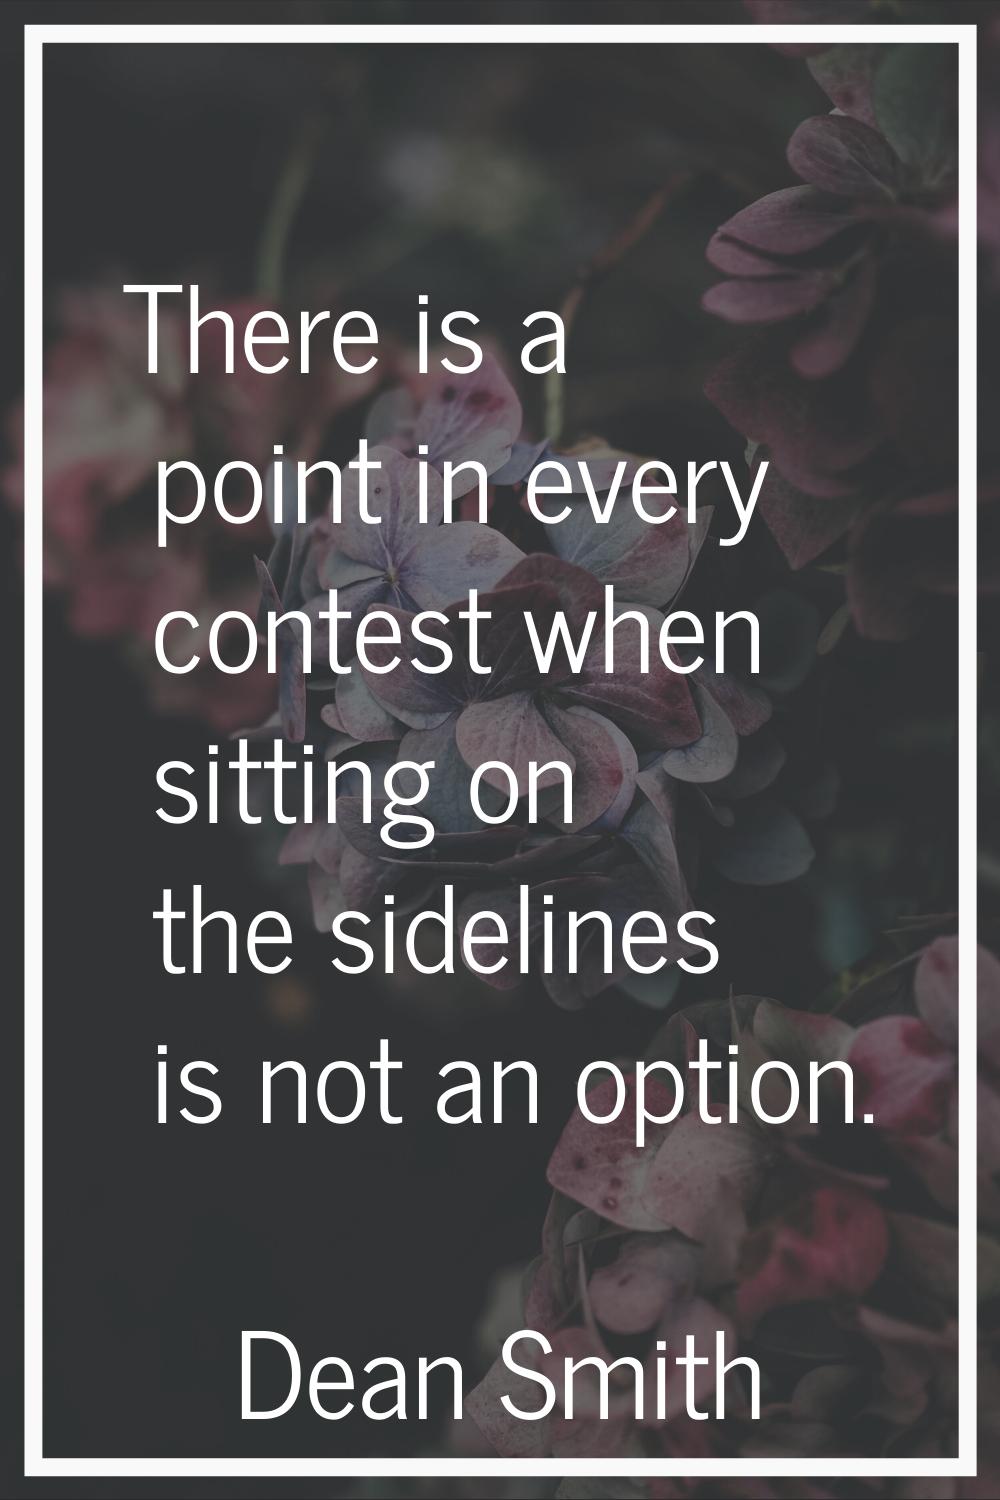 There is a point in every contest when sitting on the sidelines is not an option.